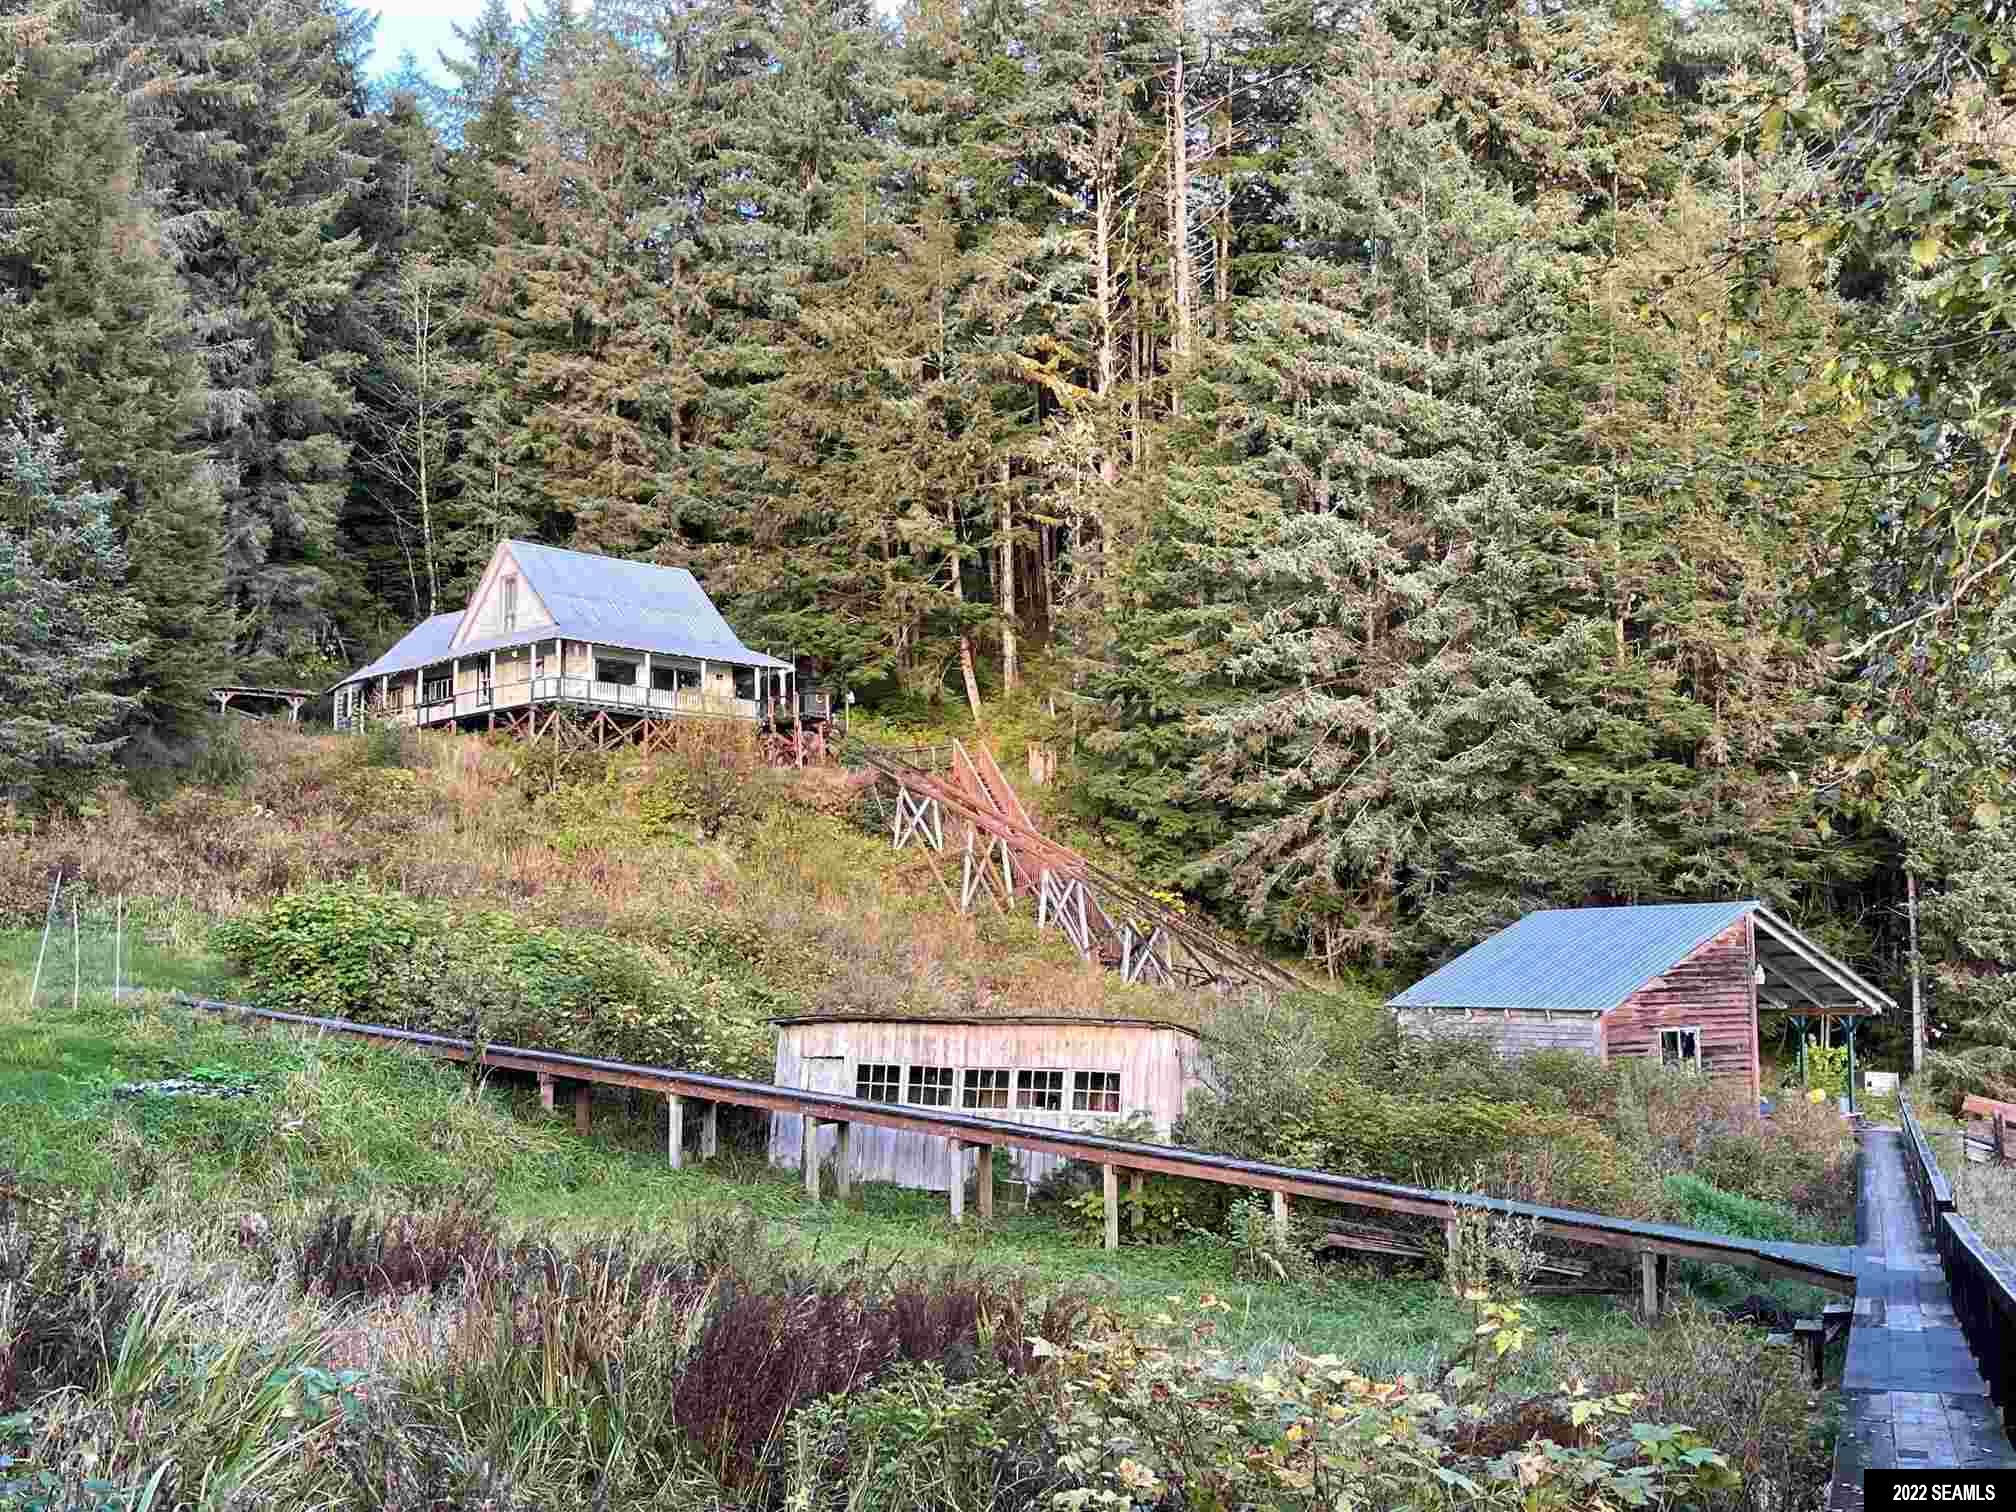 Legal Address Only, Ketchikan, AK 99901-9629, 3 Bedrooms Bedrooms, ,1 BathroomBathrooms,Residential,For Sale,Legal Address Only,22898